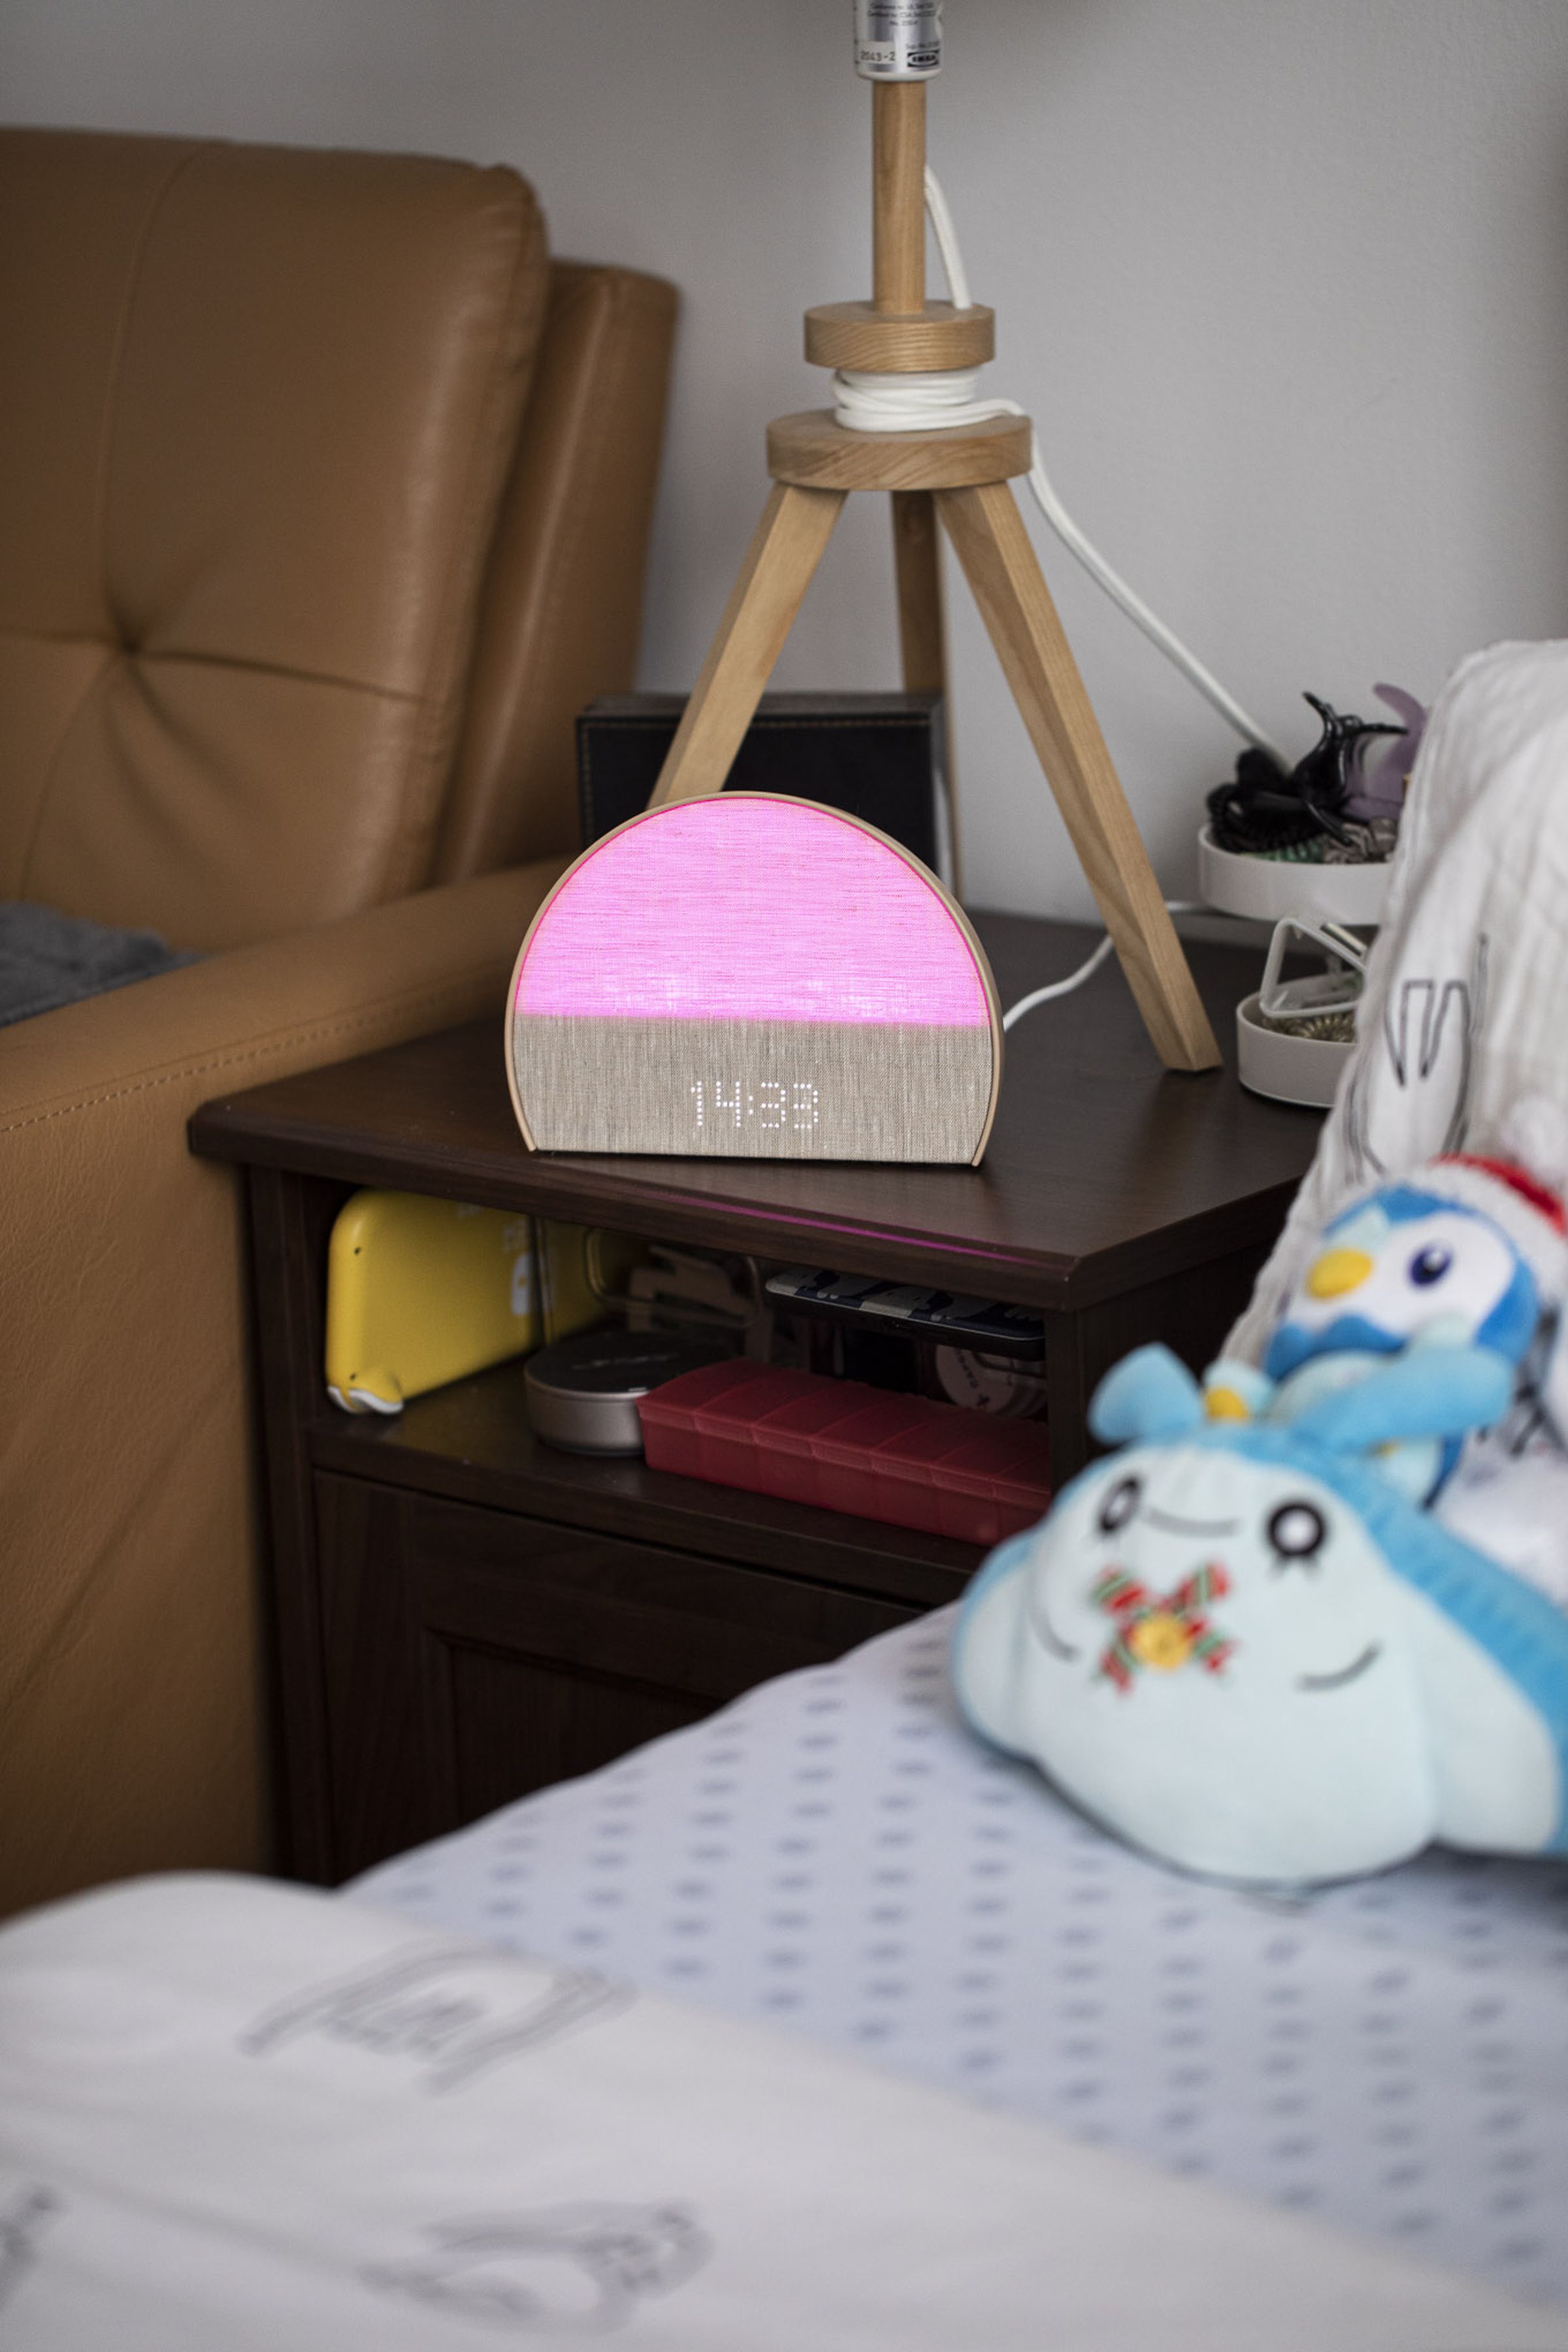 The Hatch Restore 2 on a nightstand with a pink light